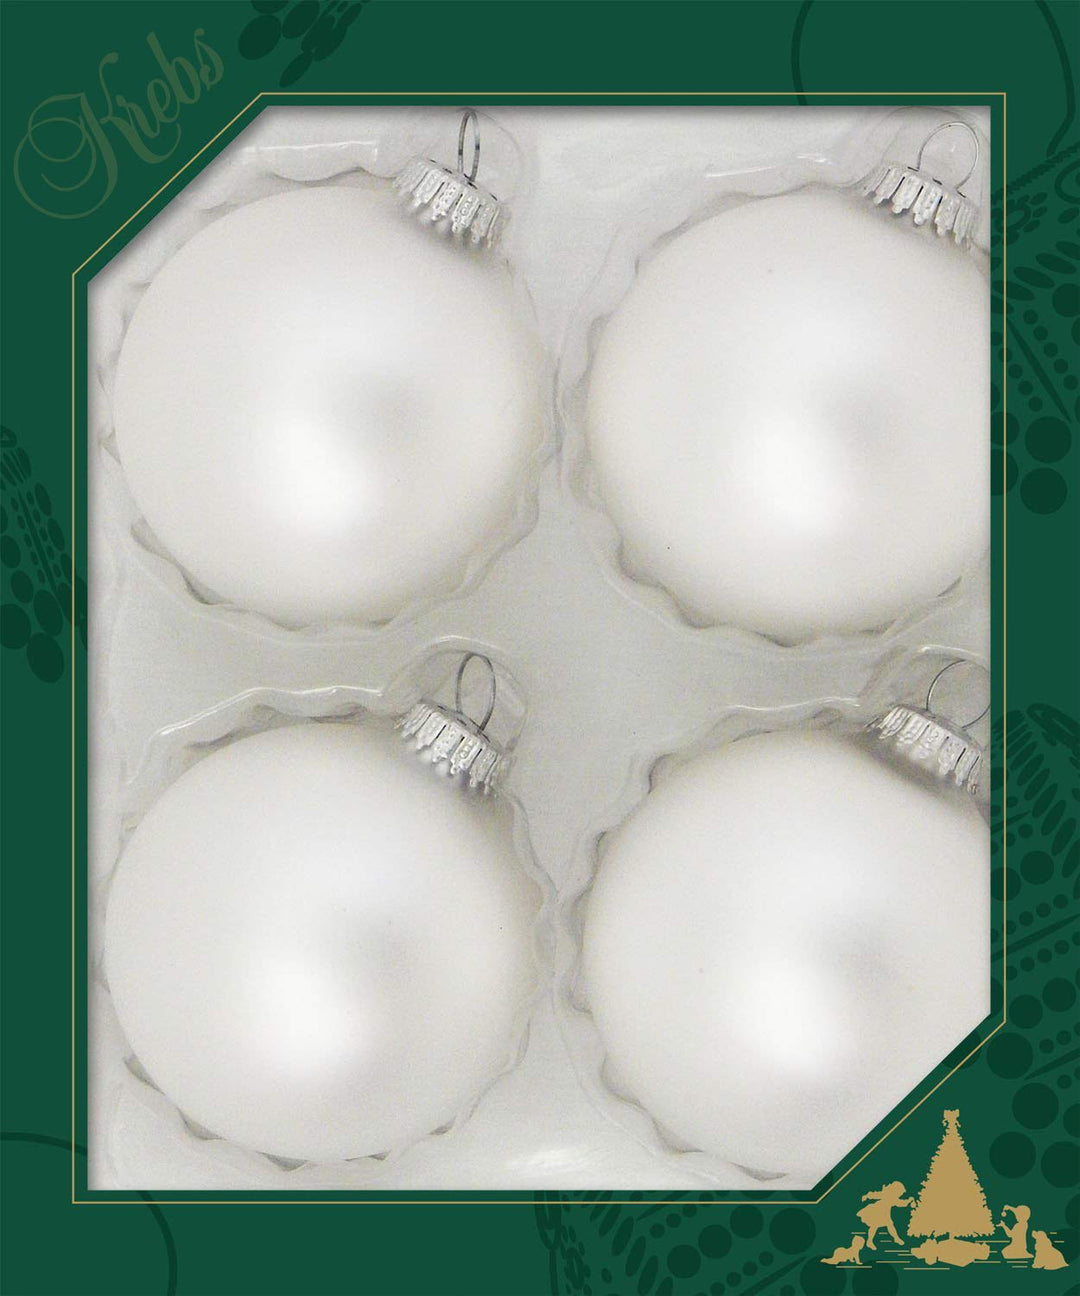 Glass Christmas Tree Ornaments - 80mm / 3.25" [4 Pieces] Designer Balls from Christmas By Krebs Seamless Hanging Holiday Decor (silver pearl)